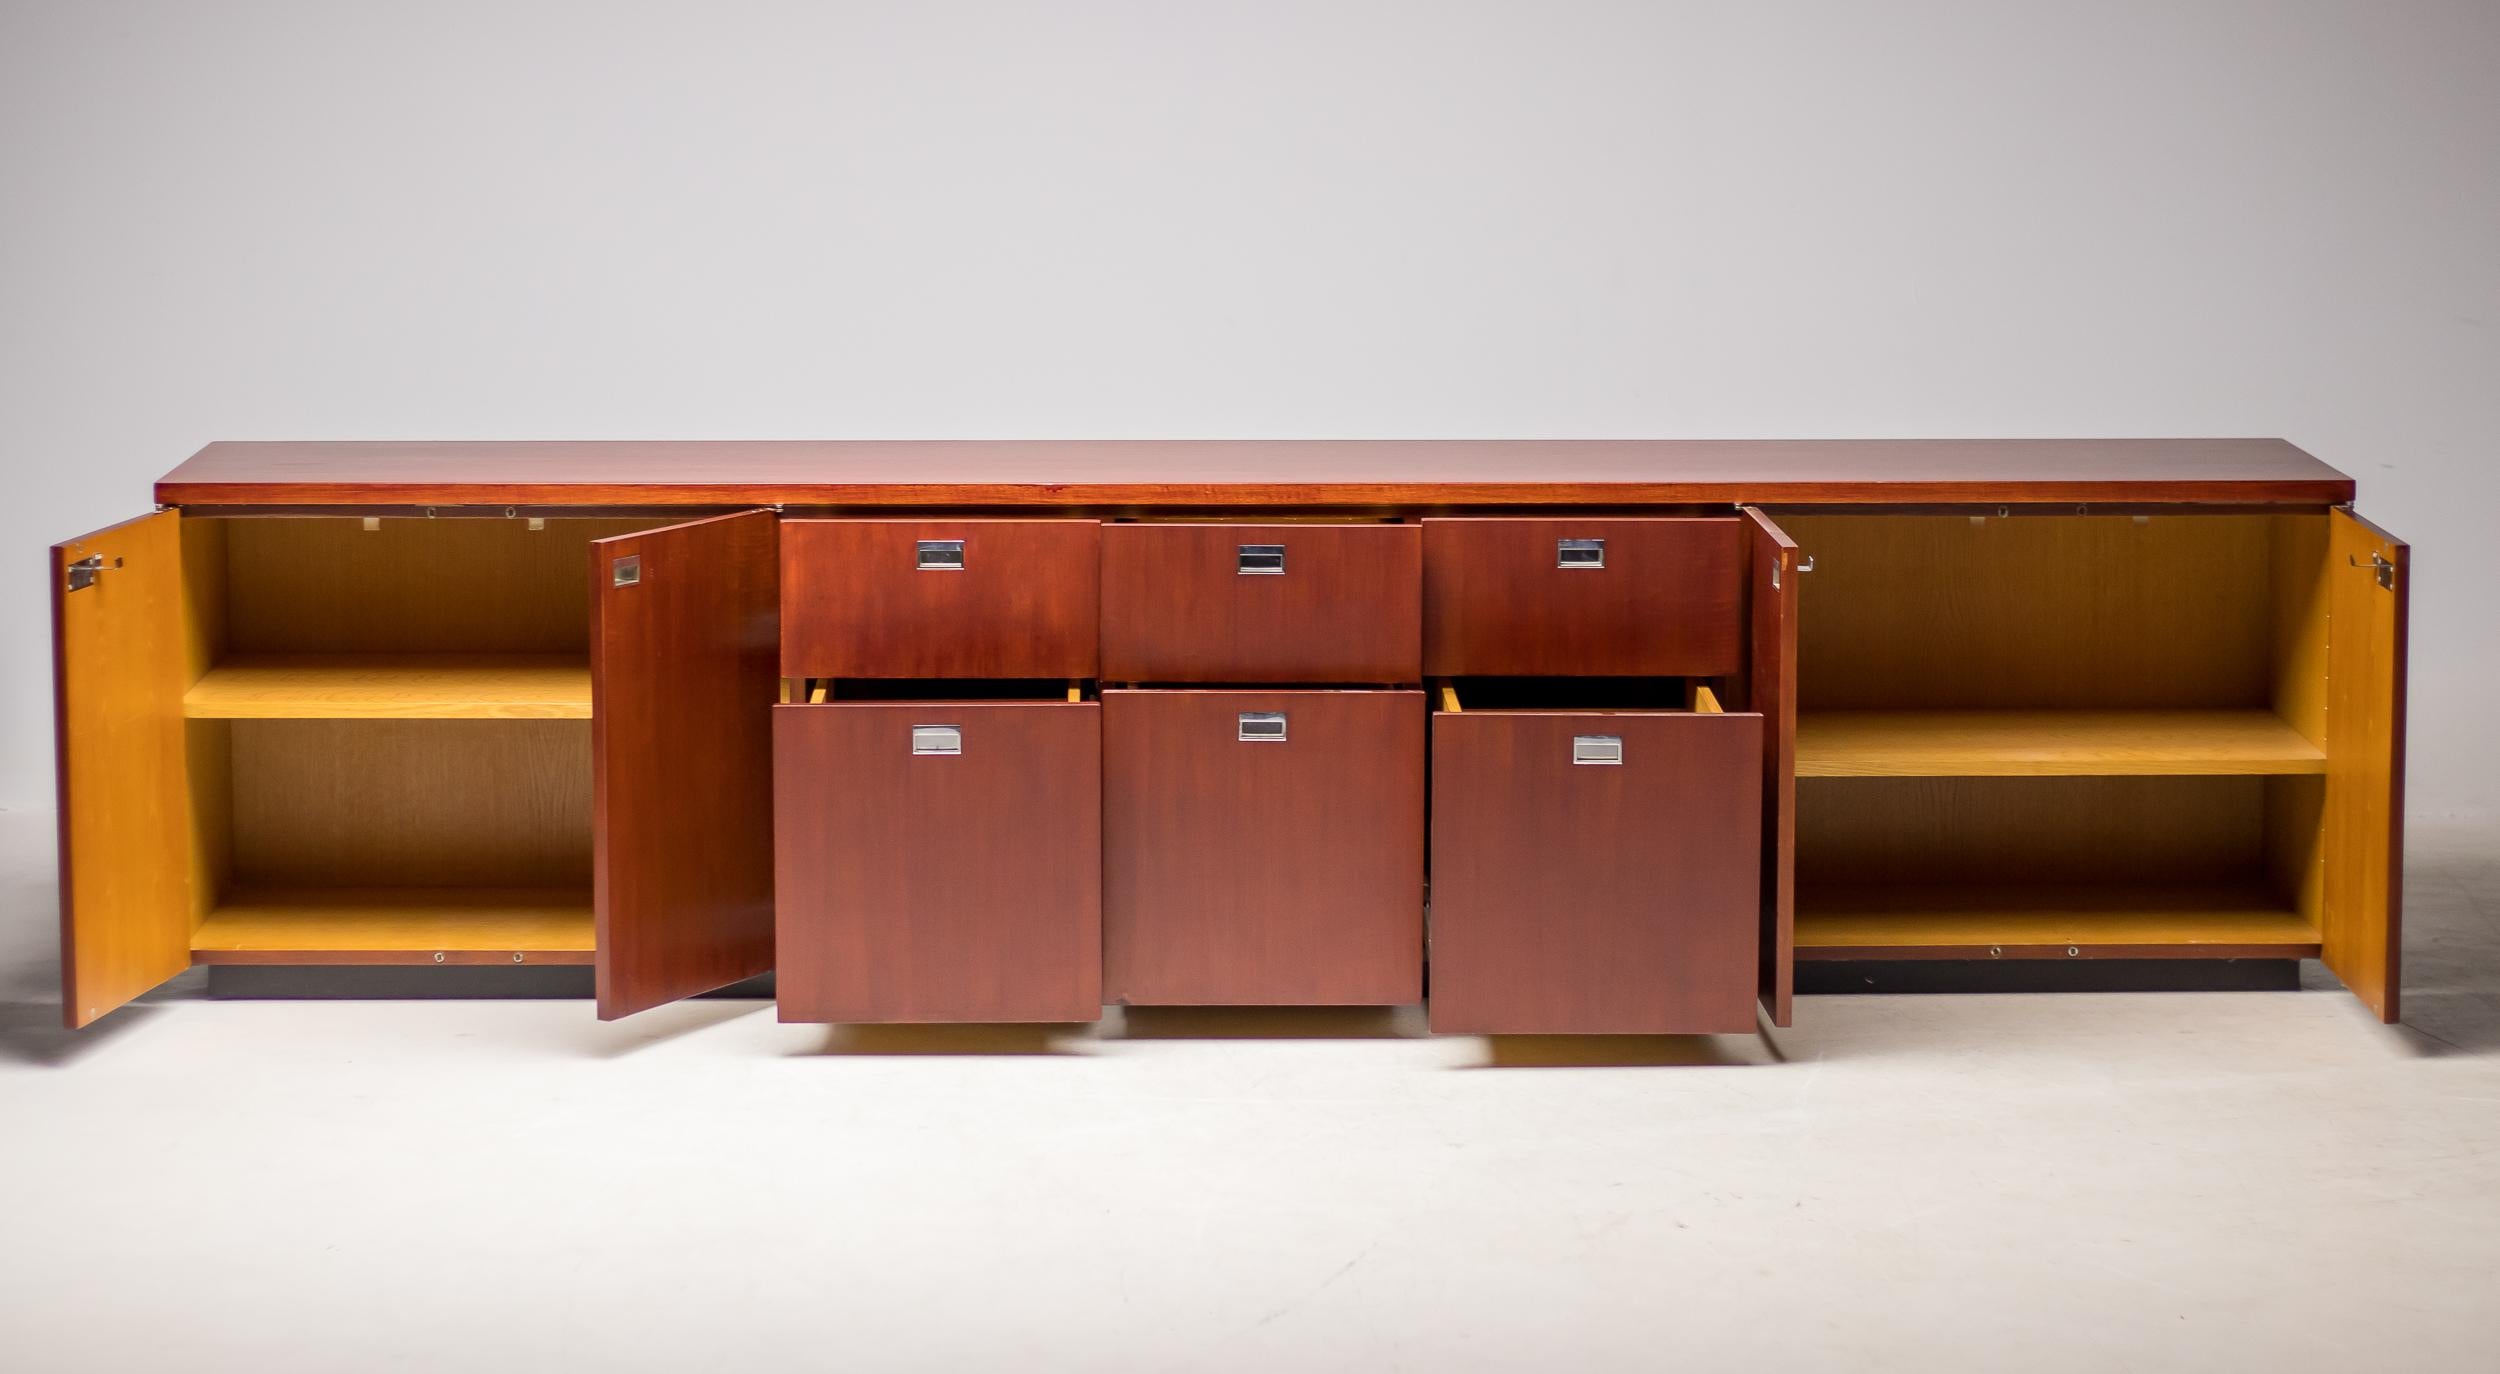 Large mahogany credenza with chrome recessed pulls, designed by Gordon Bunschaft and manufactured by De Coene for the Belgium Lambert Bank, circa 1960. The credenza features six drawers and four doors with a lock on both sides. The piece is finished